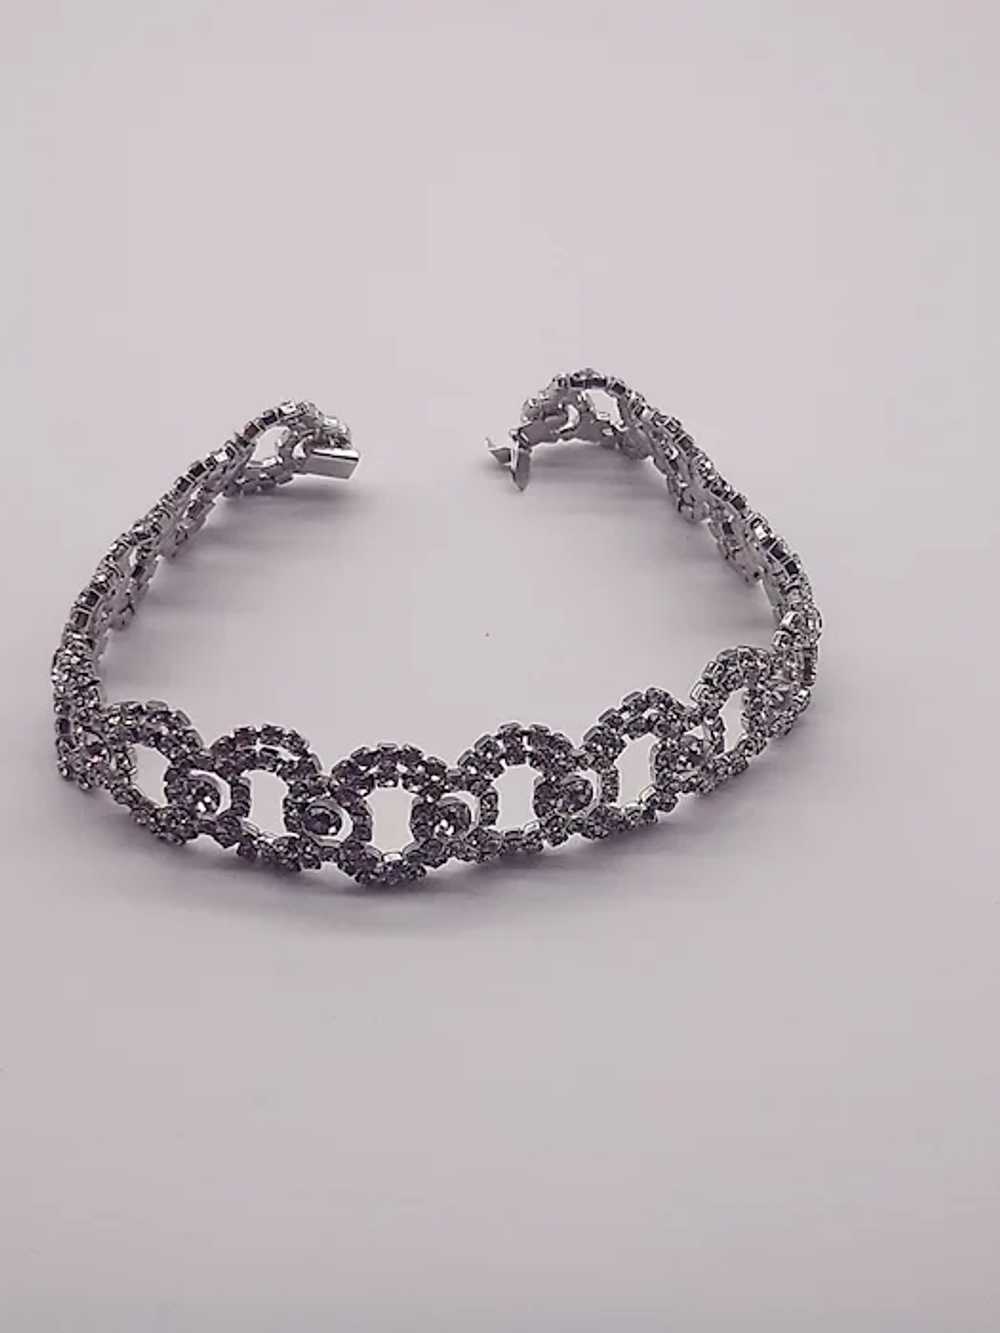 Vintage clear silver tone chocker necklace - image 5